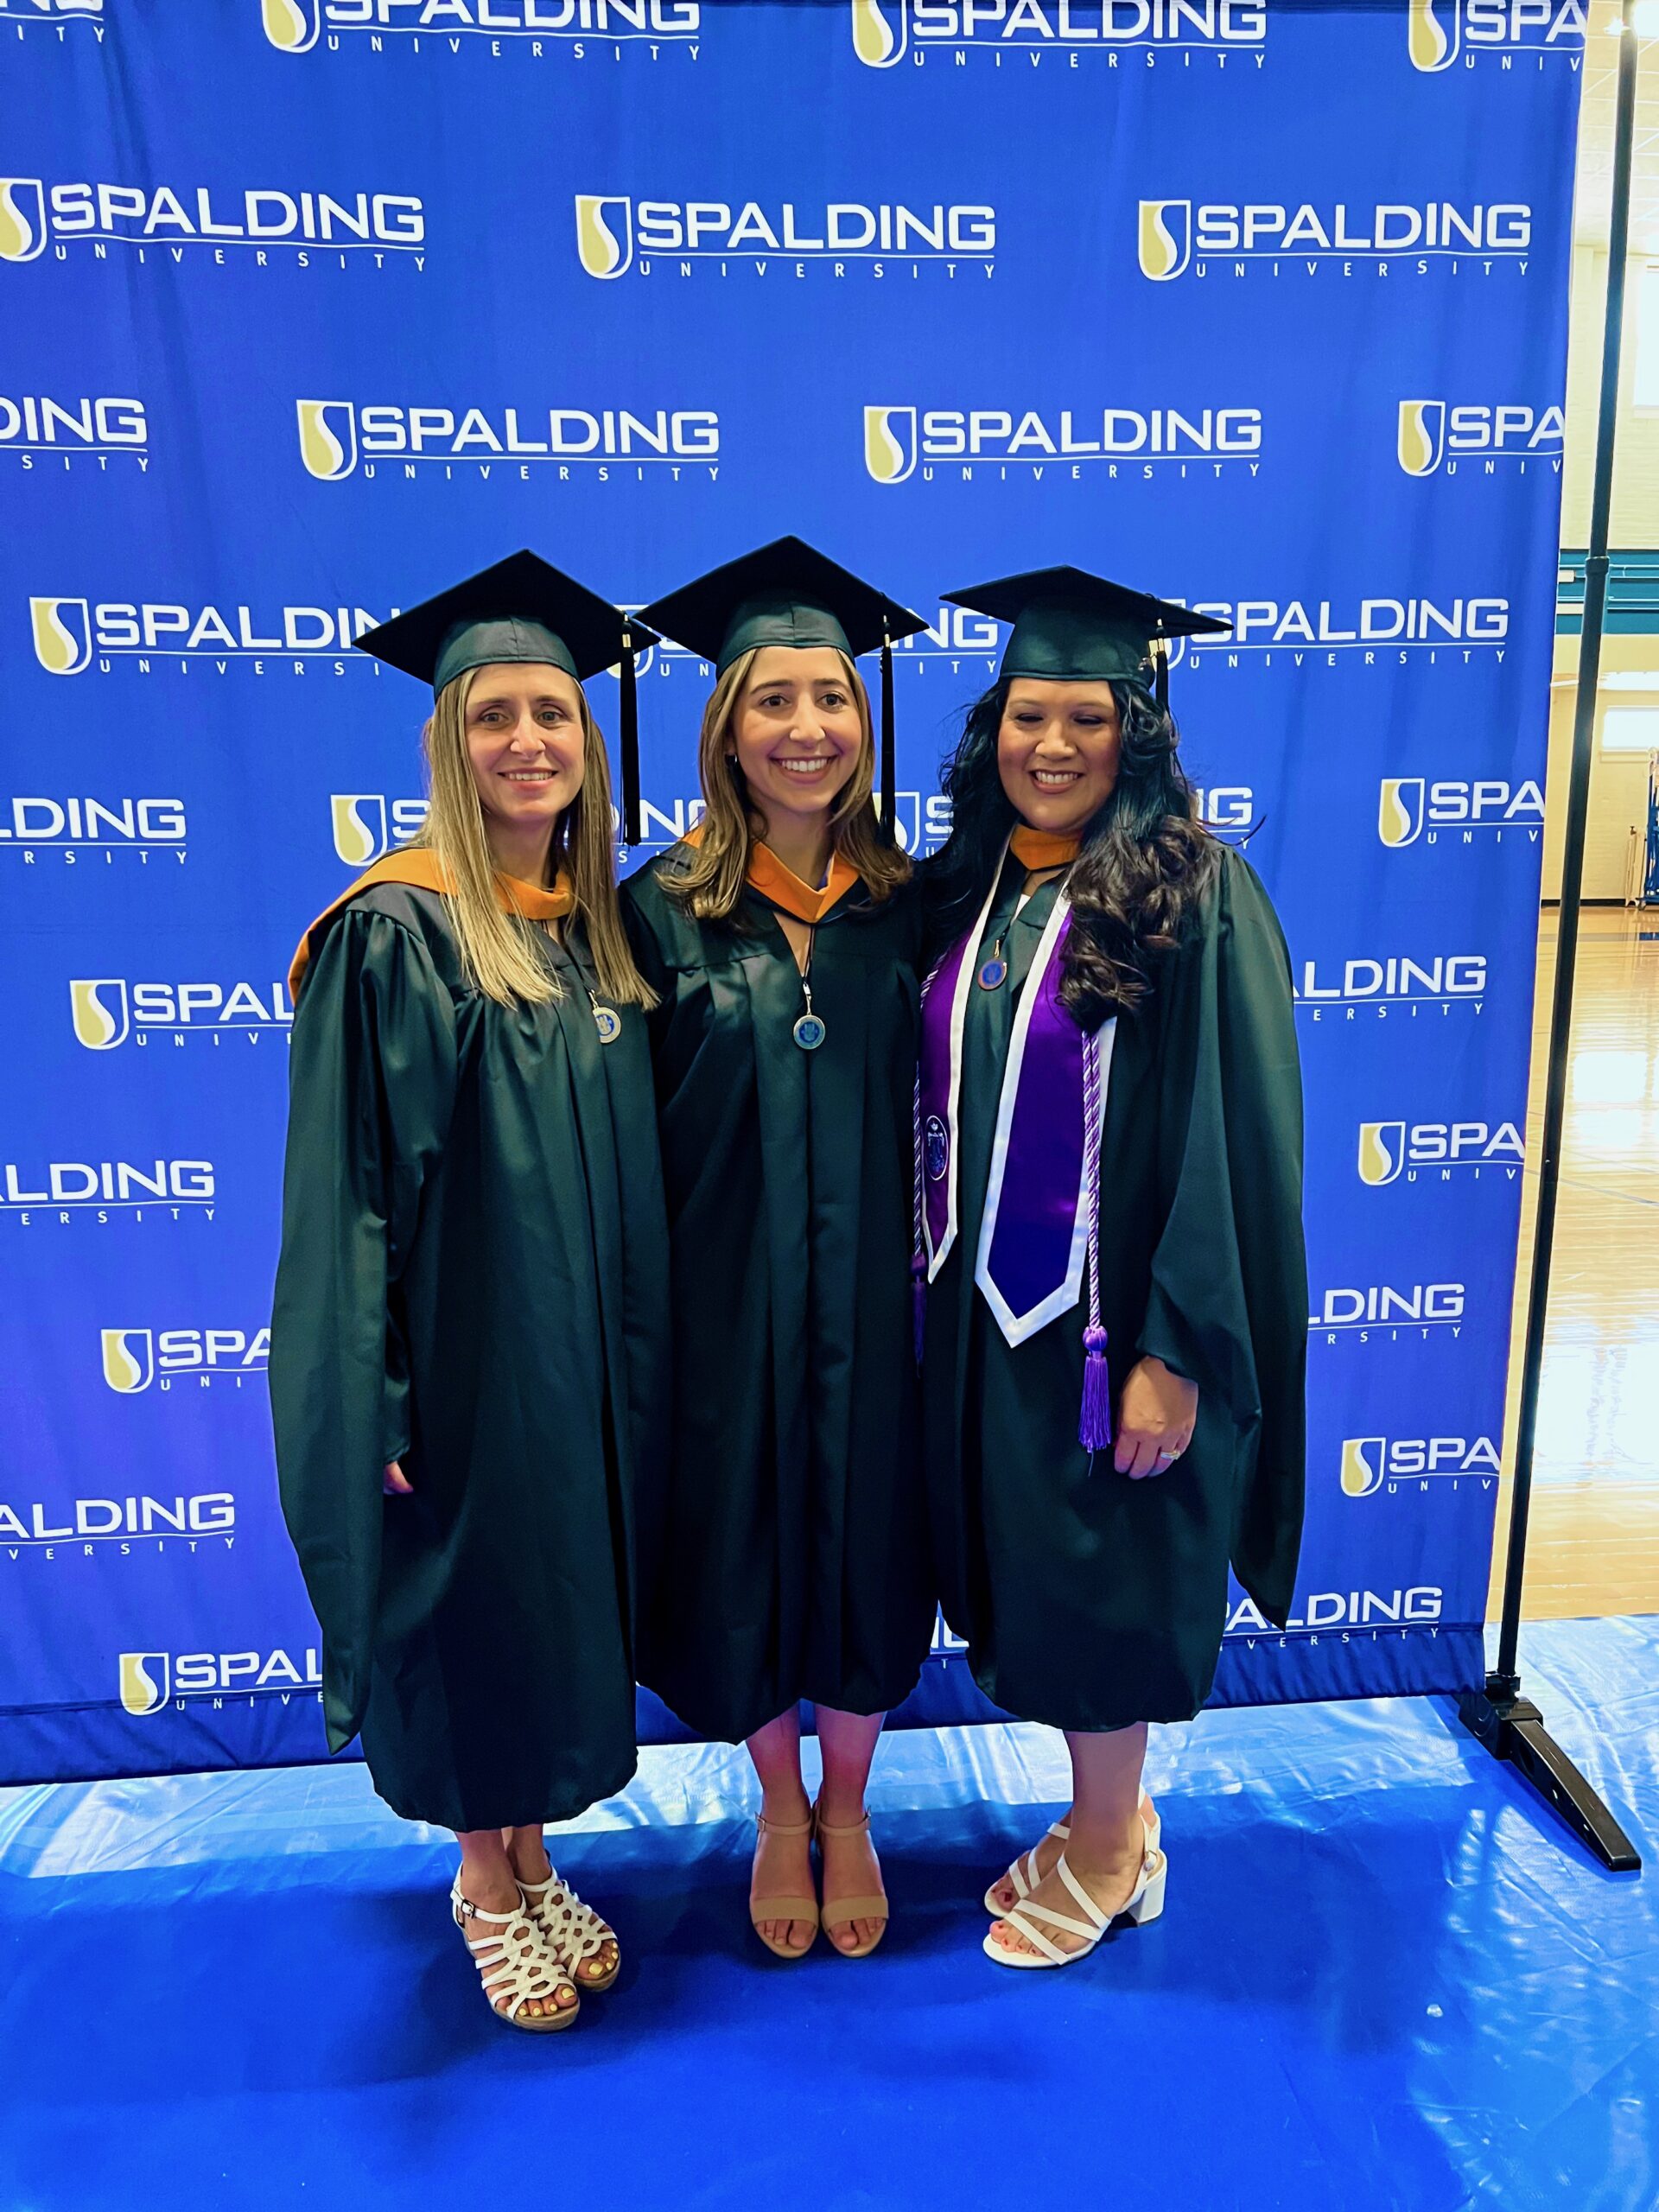 Three Spalding master's graduates posing in front of Spalding backdrop in Columbia Gym before ceremony